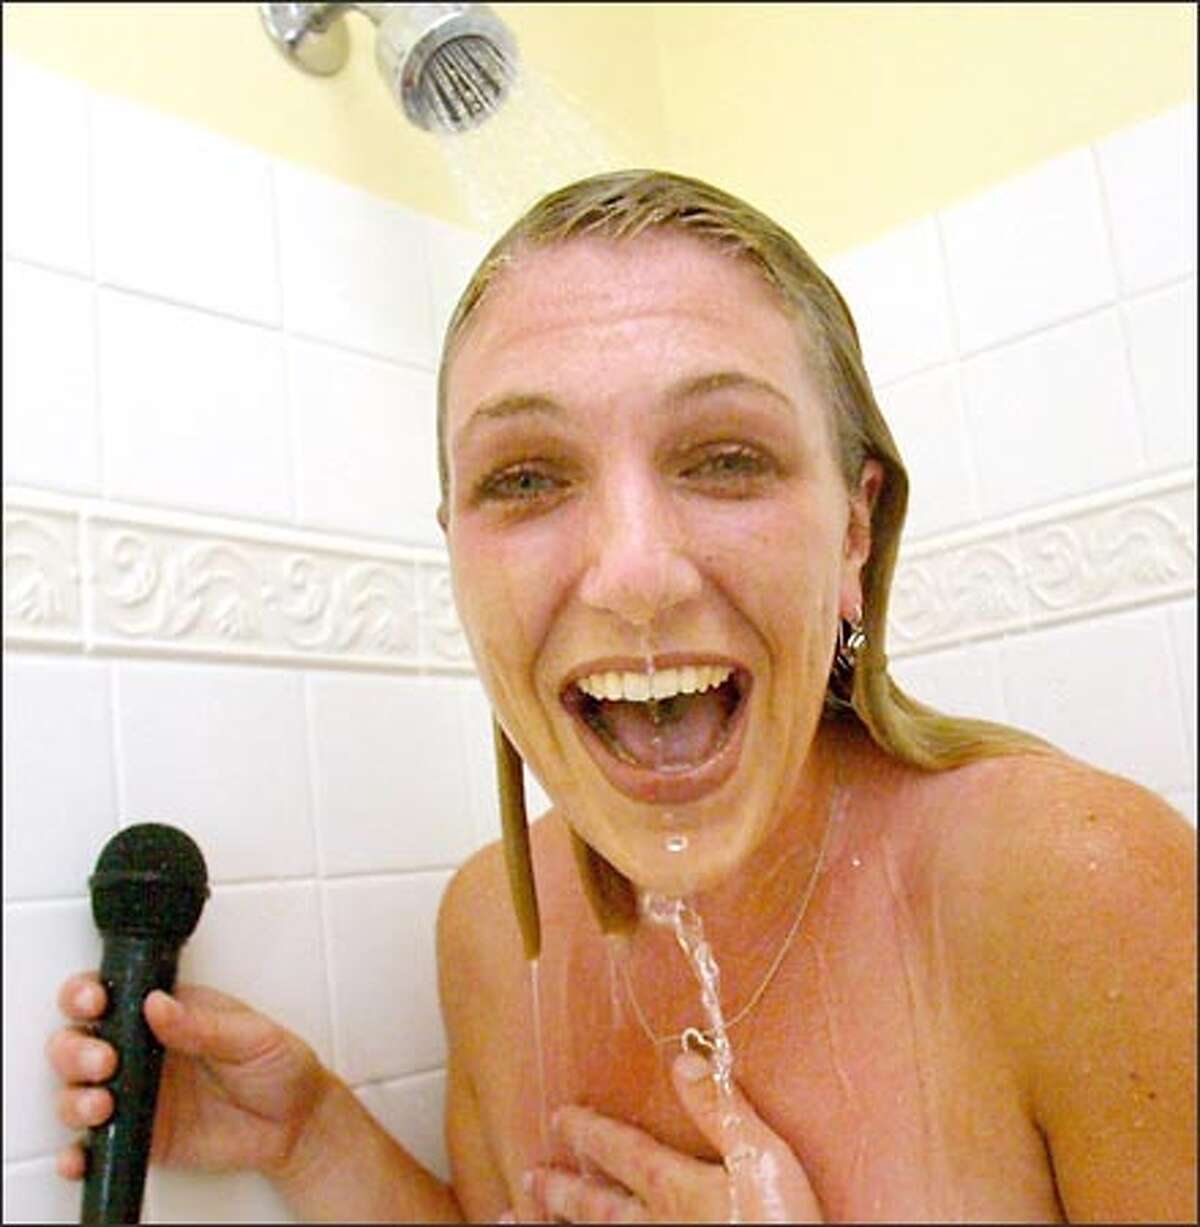 Julie Gatz, winner of the American Standard company's shower-singing contest, practices "Fly Me to the Moon," which she hopes to include on her new CD.